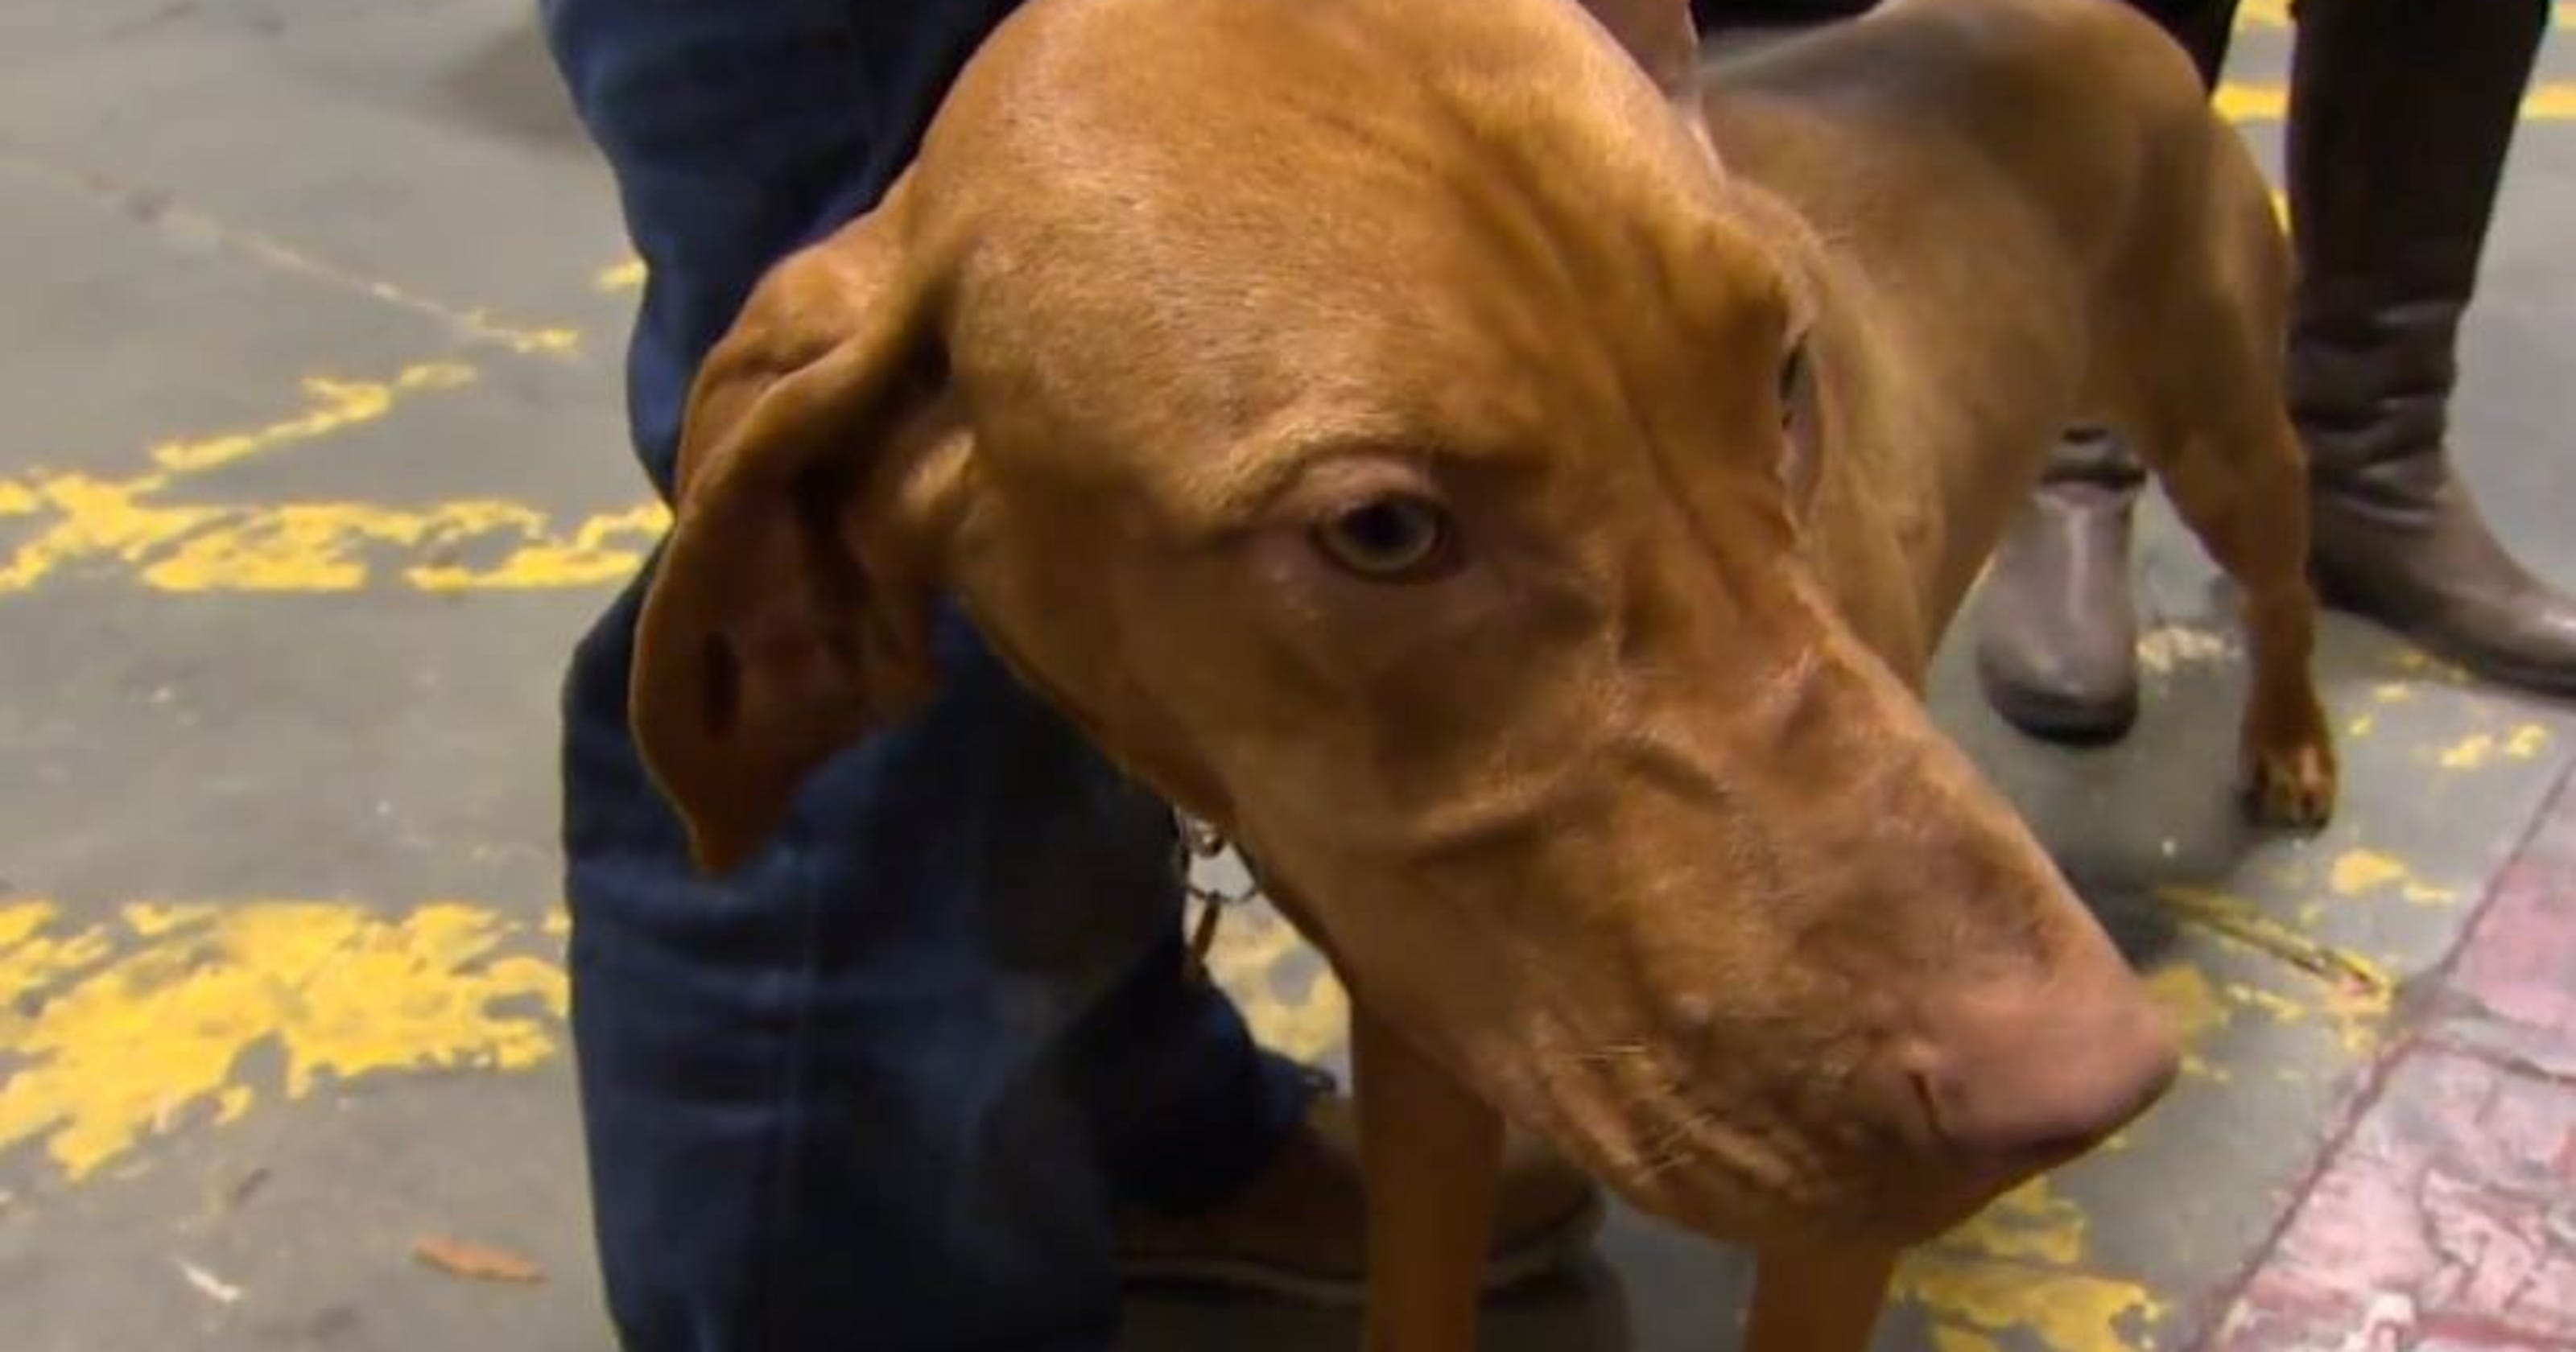 Lost dog home after 2,400mile road trip